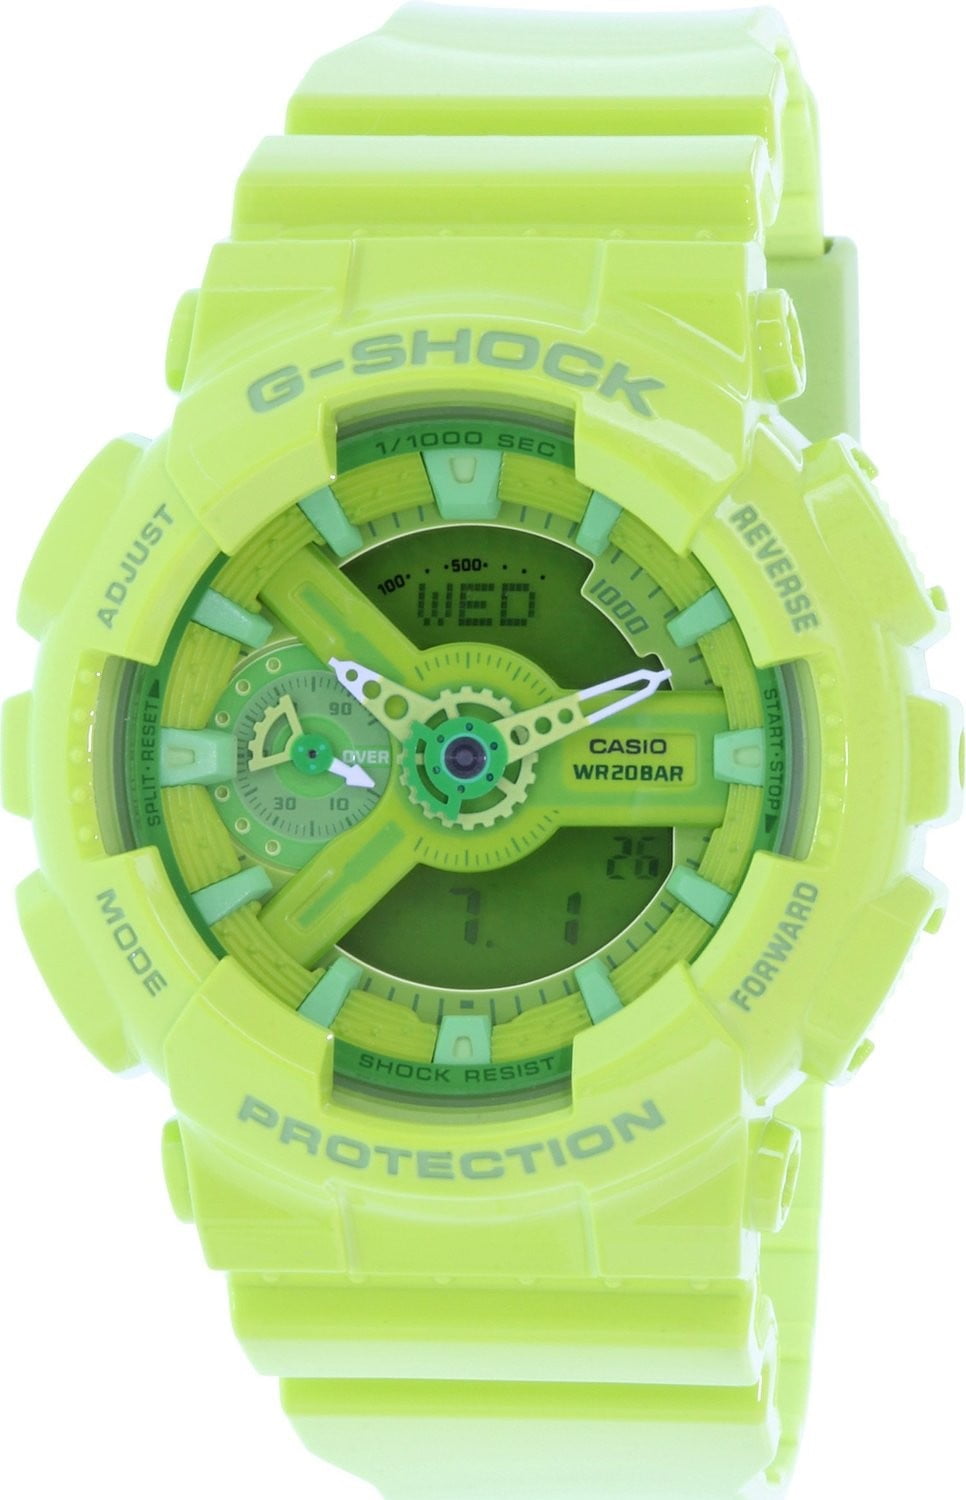 G-Shock Series Resin Case and Strap Lime Green Watch - GMAS110CC-3A - Walmart.com